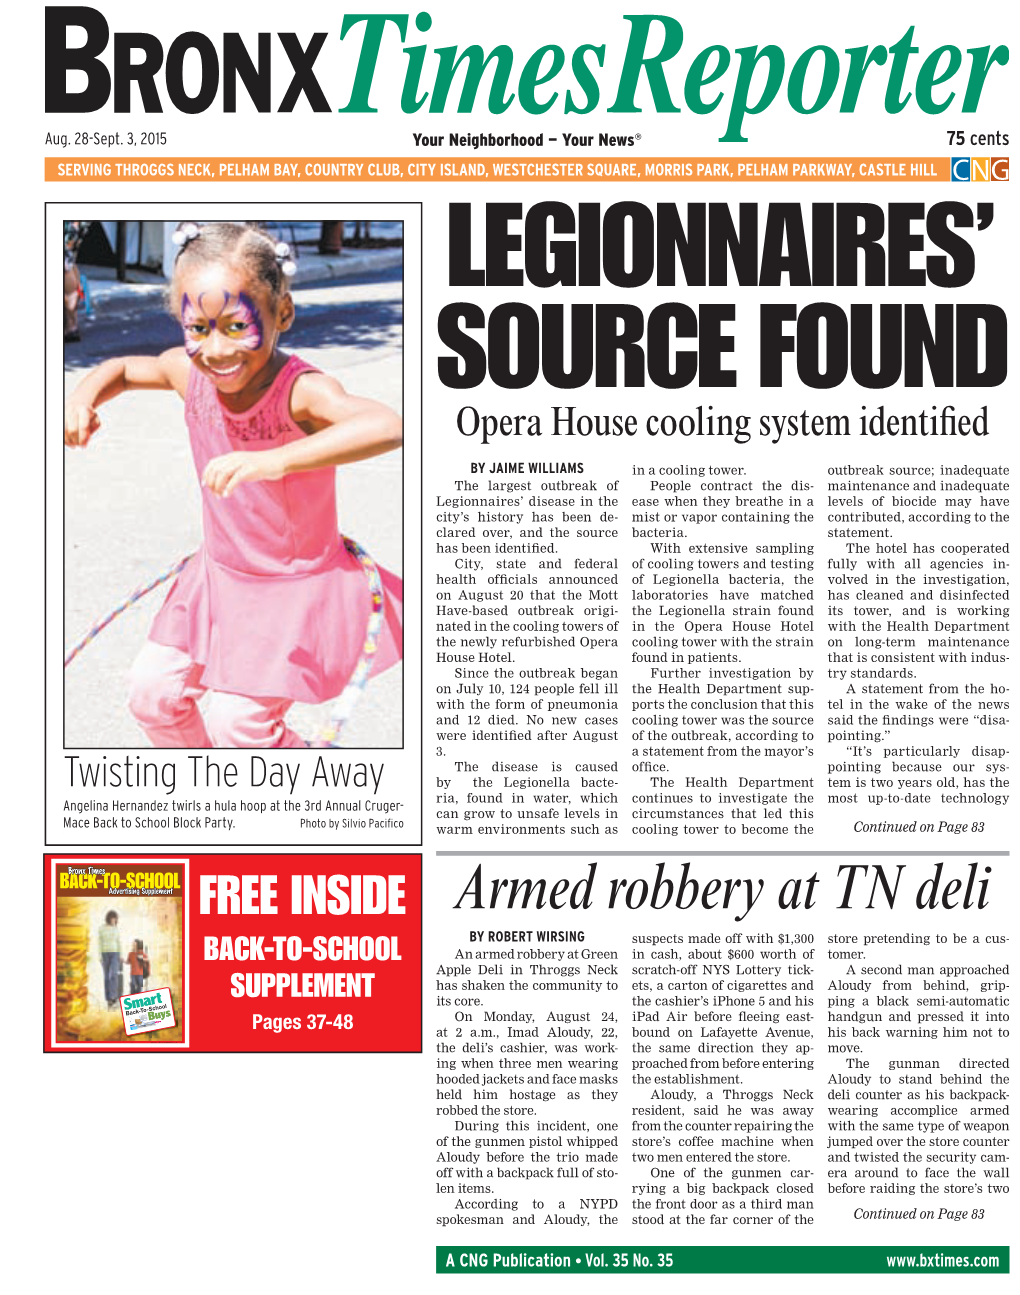 Bronx Times Reporter: August 28, 2015